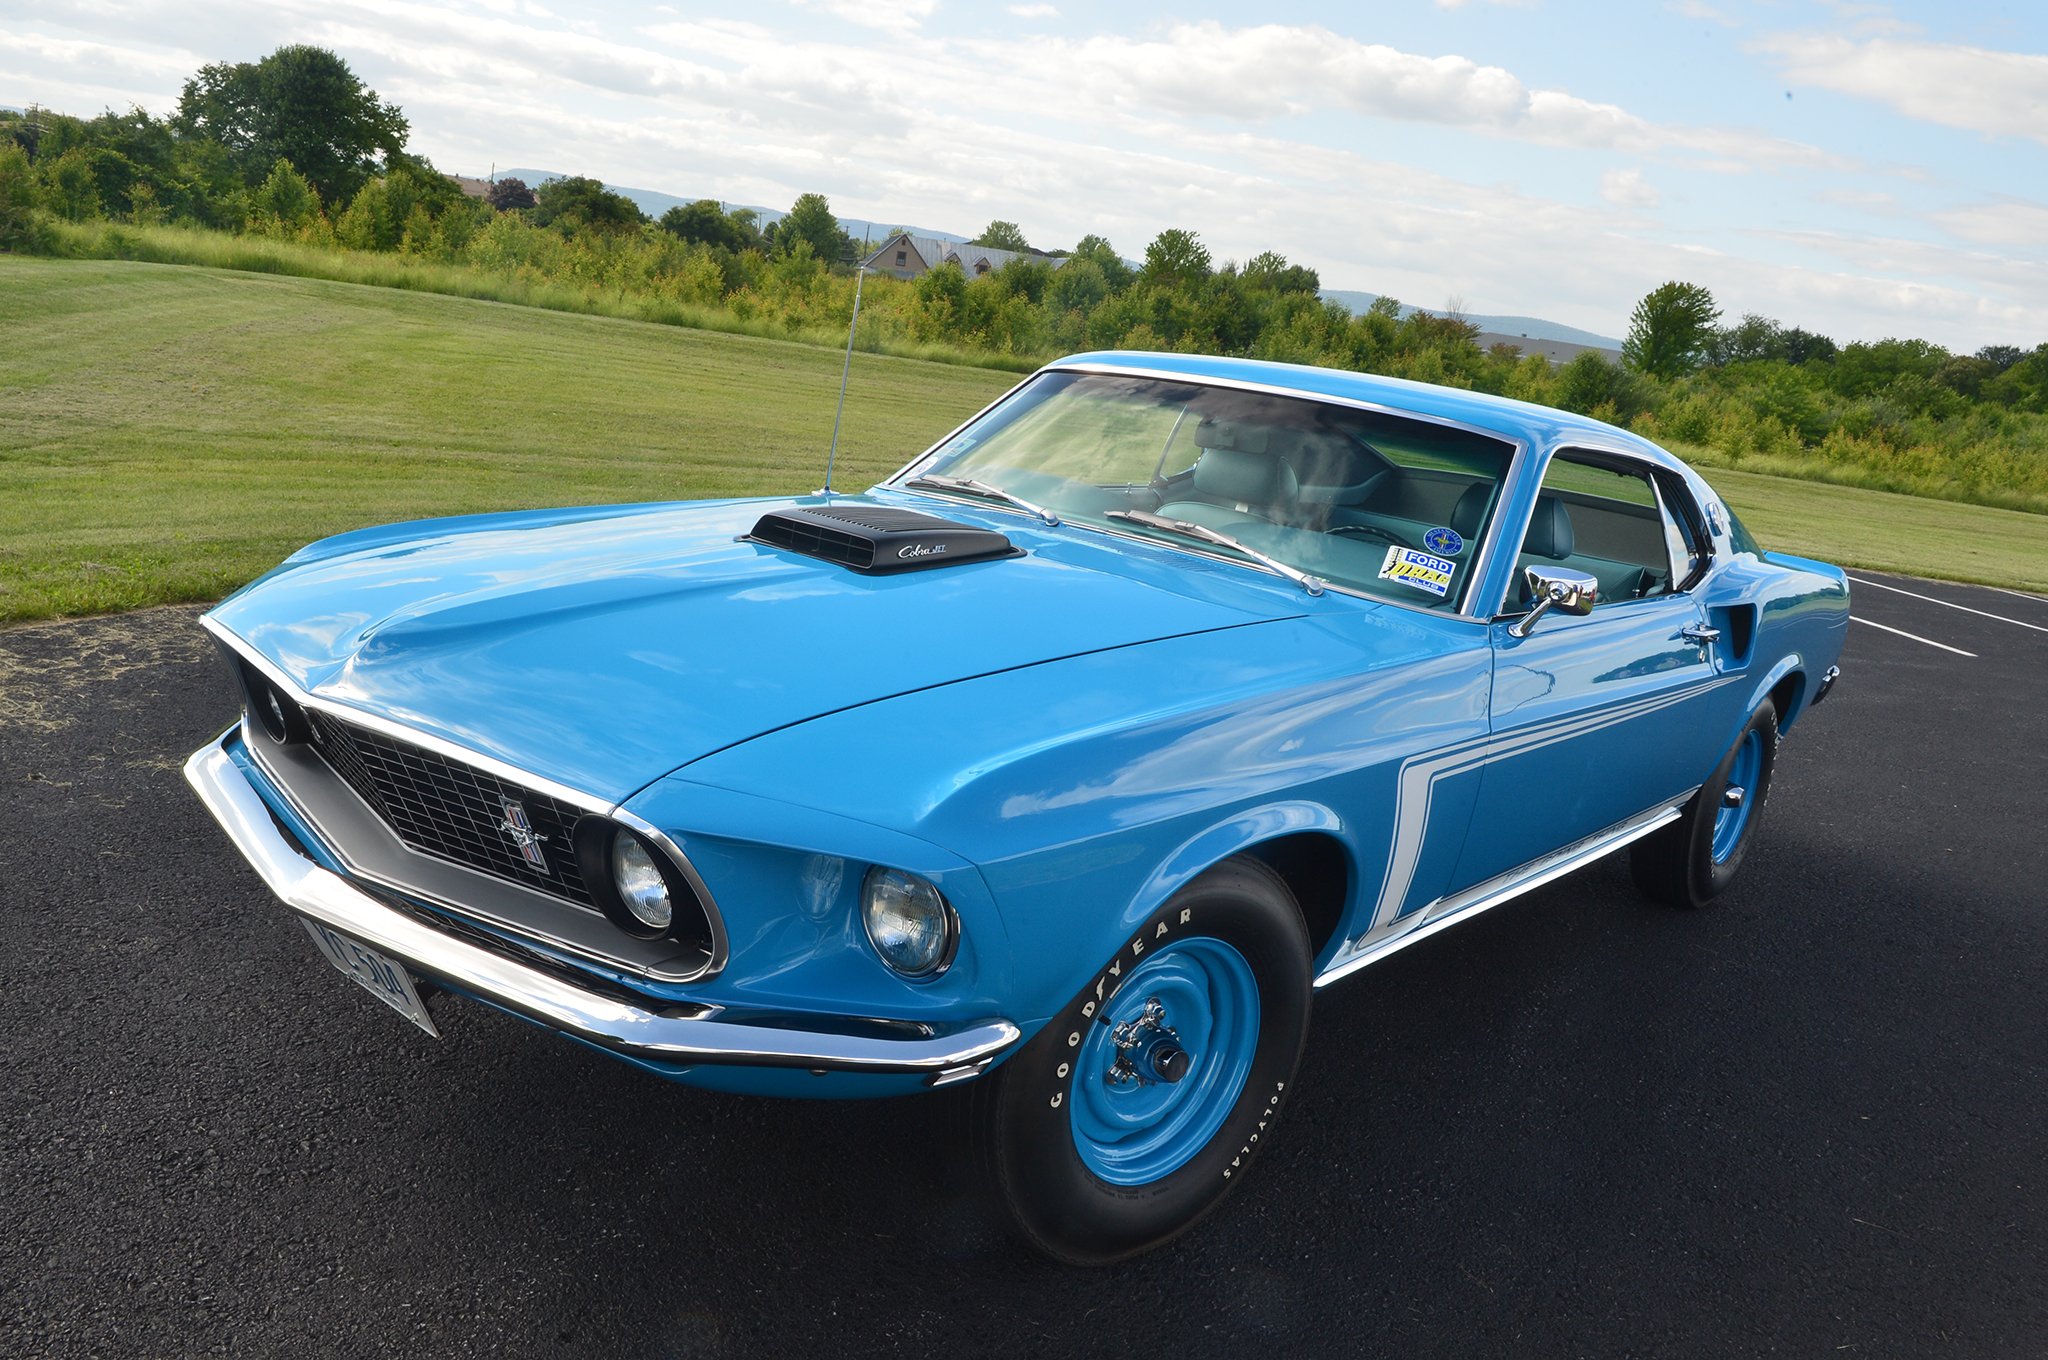 1969, Ford, Mustang, Gt, Fastback, Light, Weight, Muscle, Classic, Old, Original, Blue, Usa, 2048x13560 01 Wallpaper